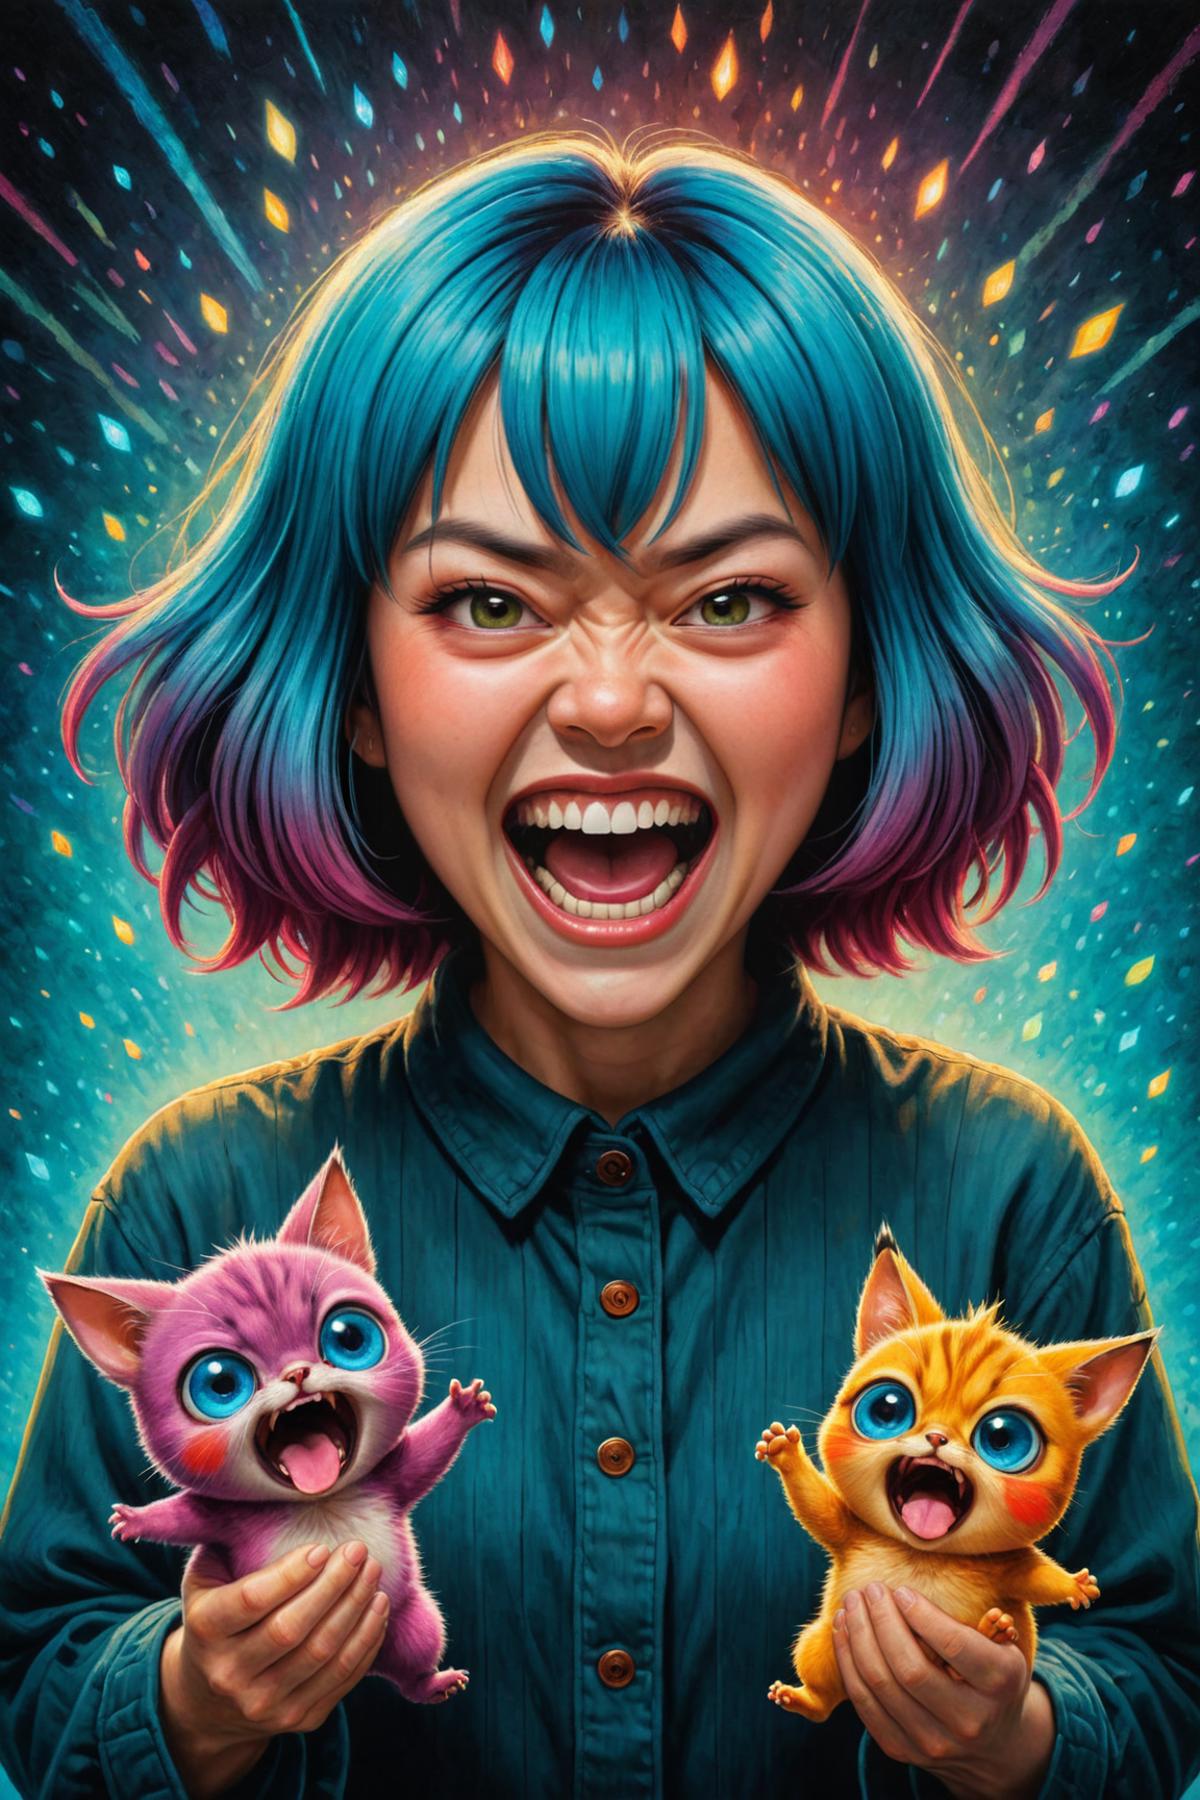 A girl with a ferocious look and two cat companions in a colorful background.